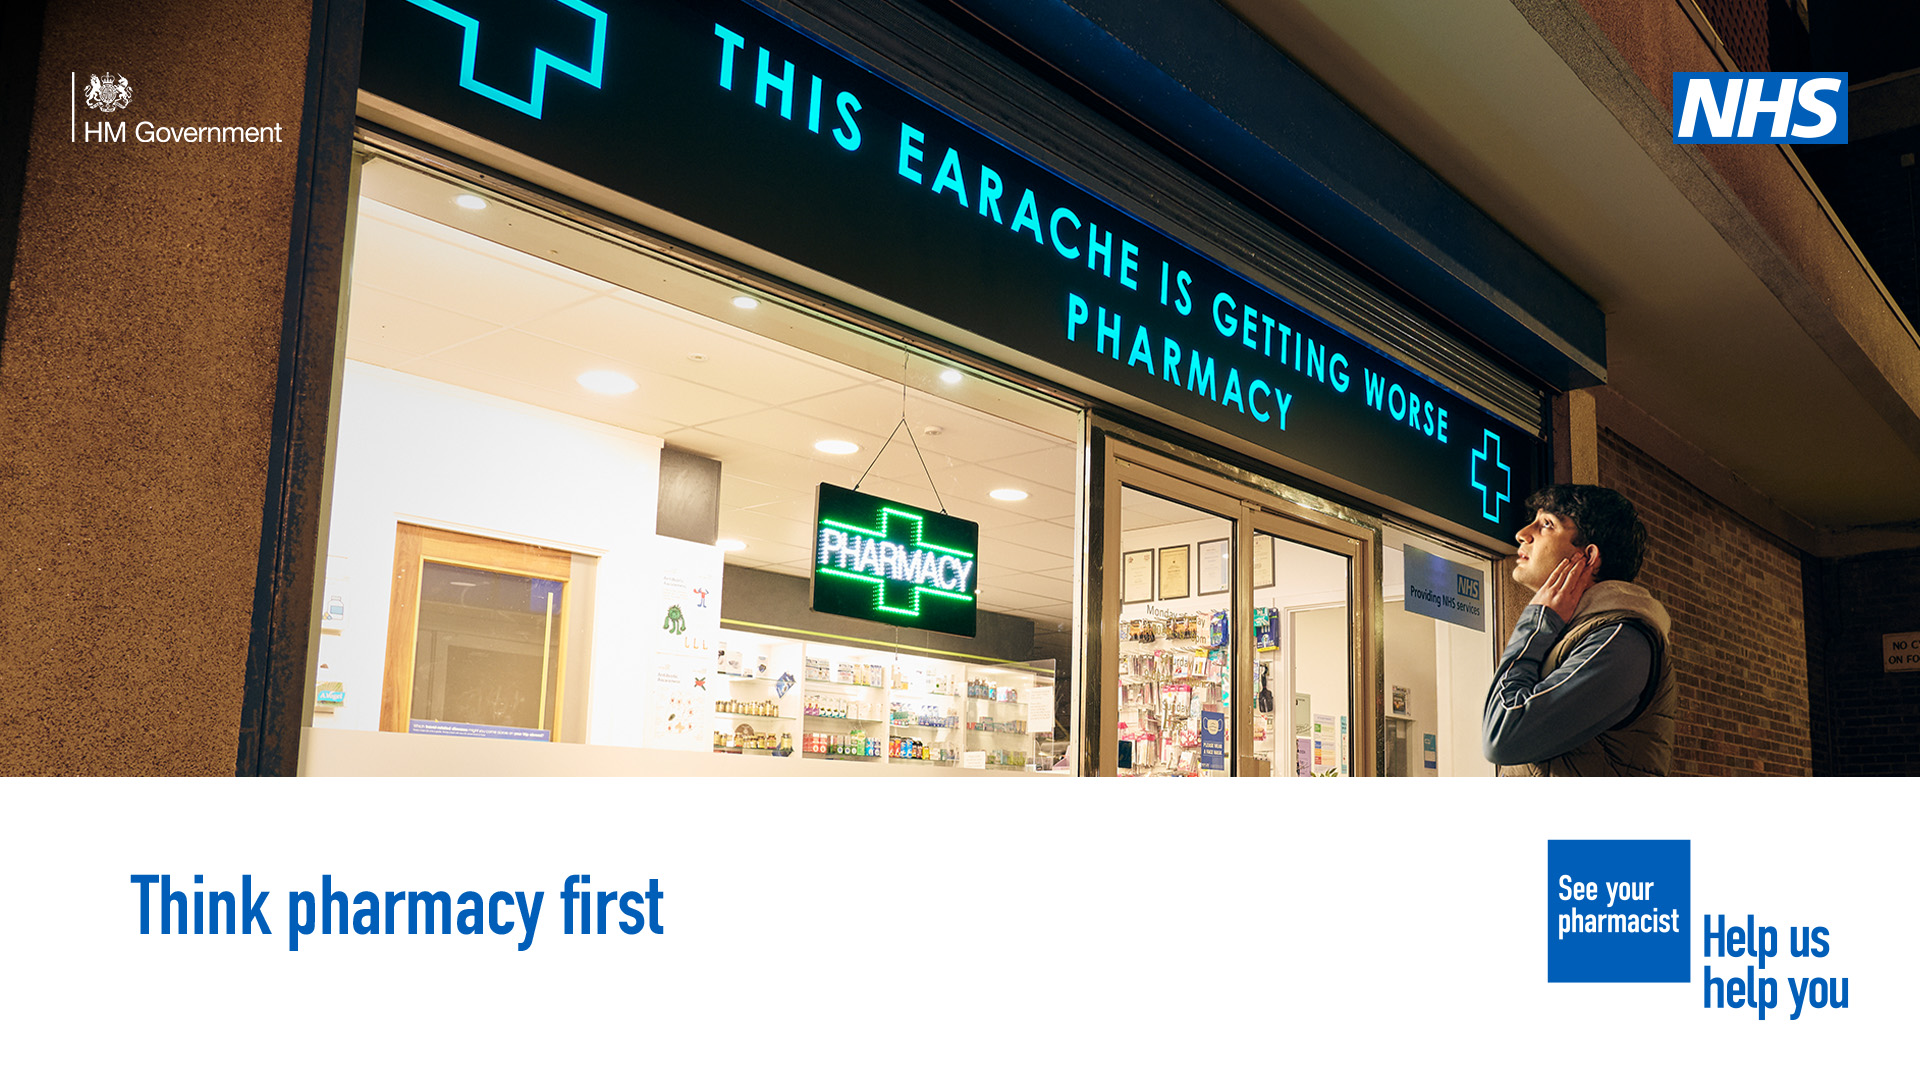 a person stood outside a pharmacy holding their ear with the pharmacy sign reading this earache is getting worse